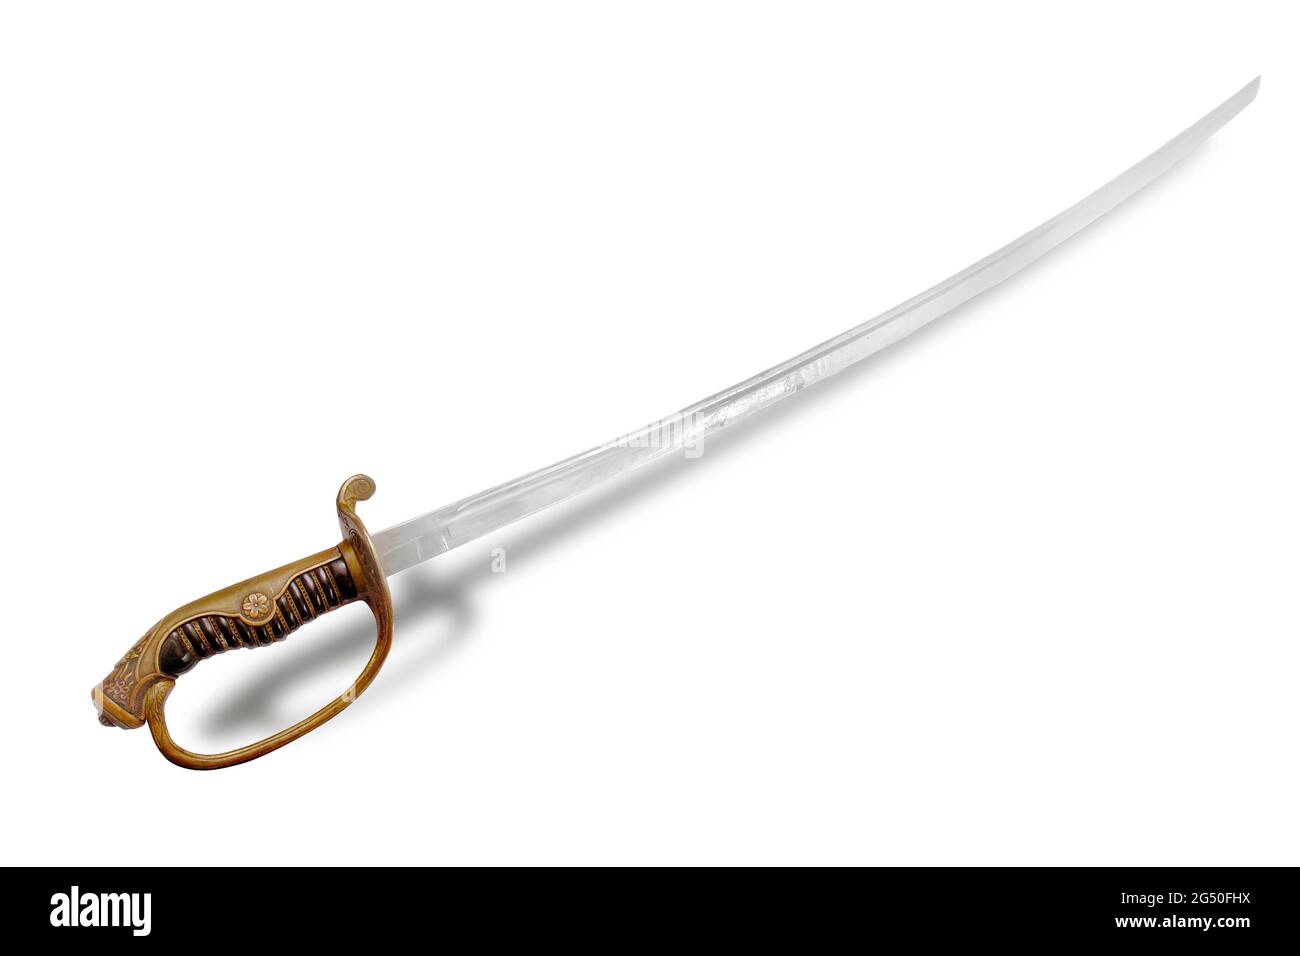 Japanese officer saber (sabre) on the white background.  Empire of Japan. Early 20th century. Stock Photo